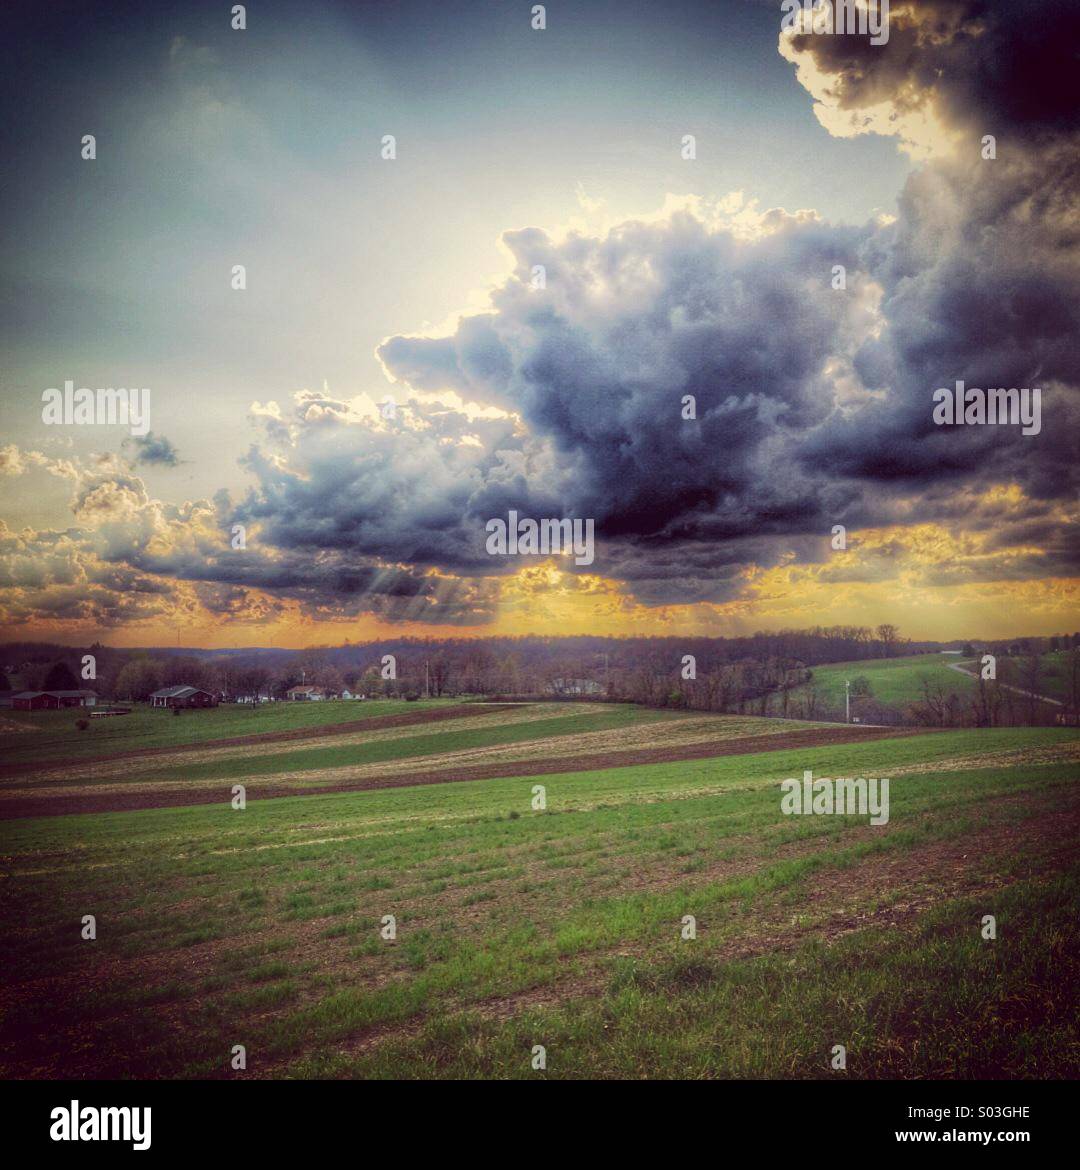 A dramatic cloudy sky over a field at sunset Stock Photo